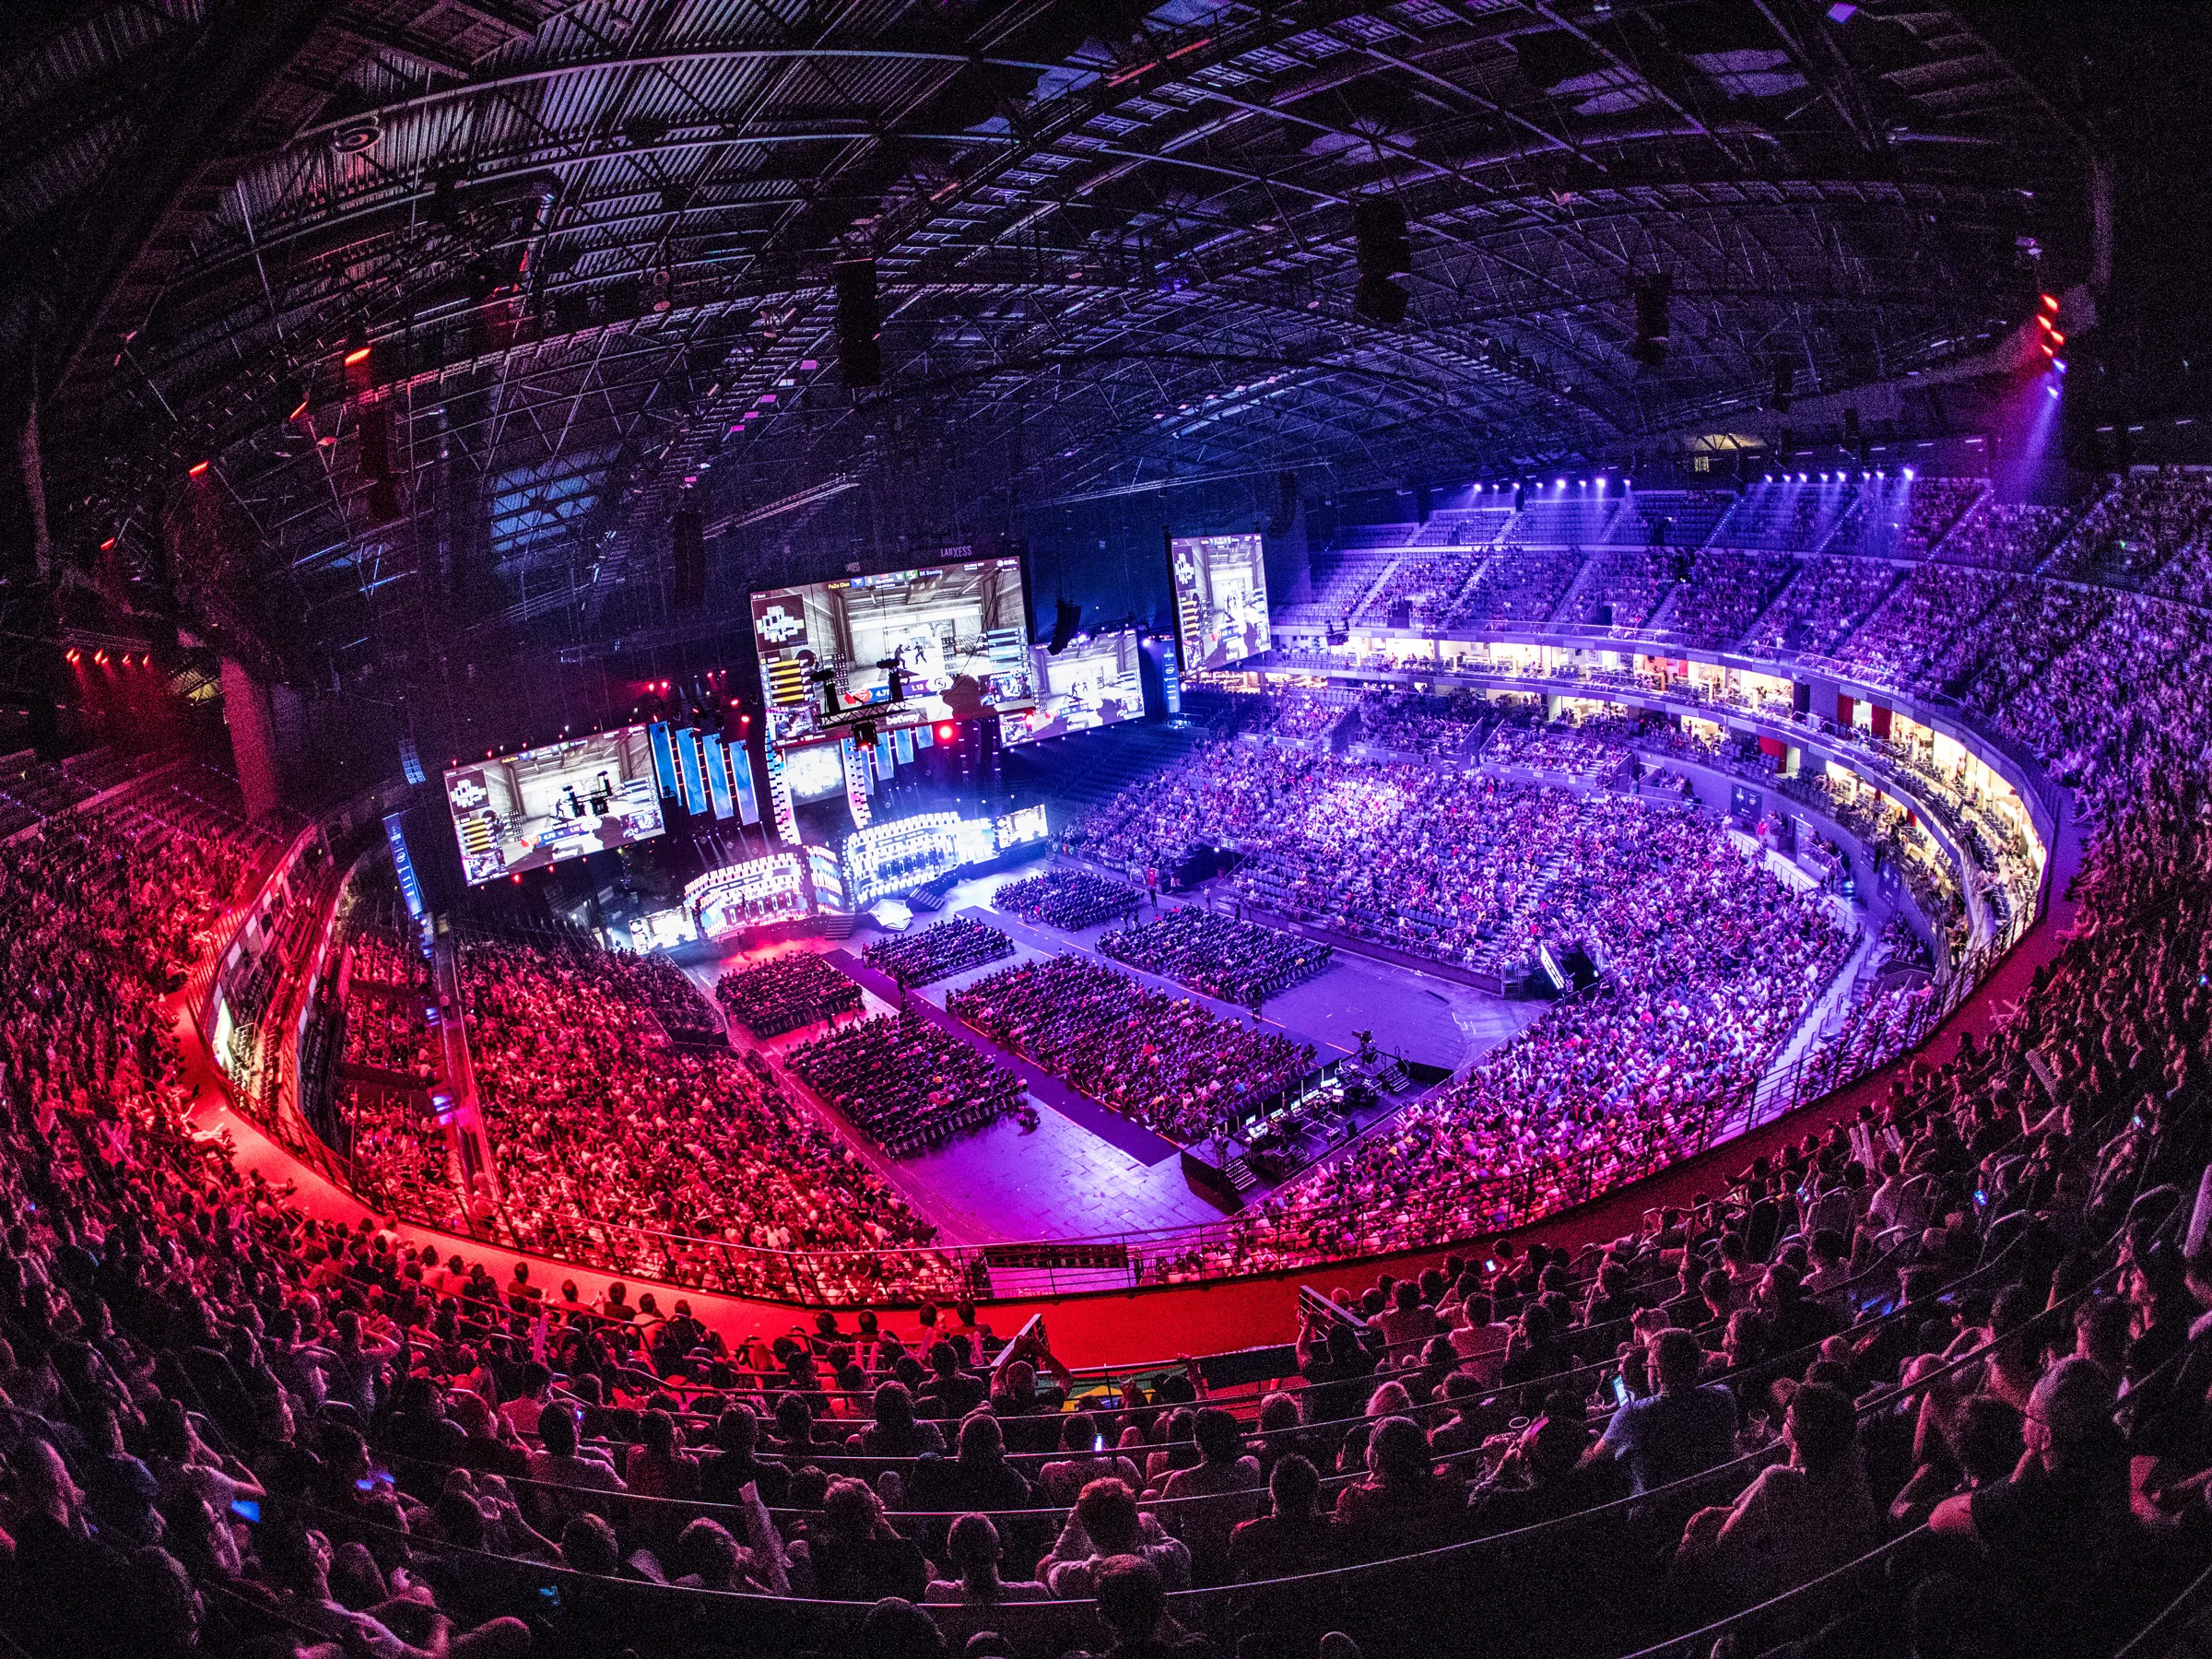 eSports: ESL One Cologne, A Counter-Strike: Global Offensive tournament, Team combat gaming sport. 2400x1800 HD Wallpaper.